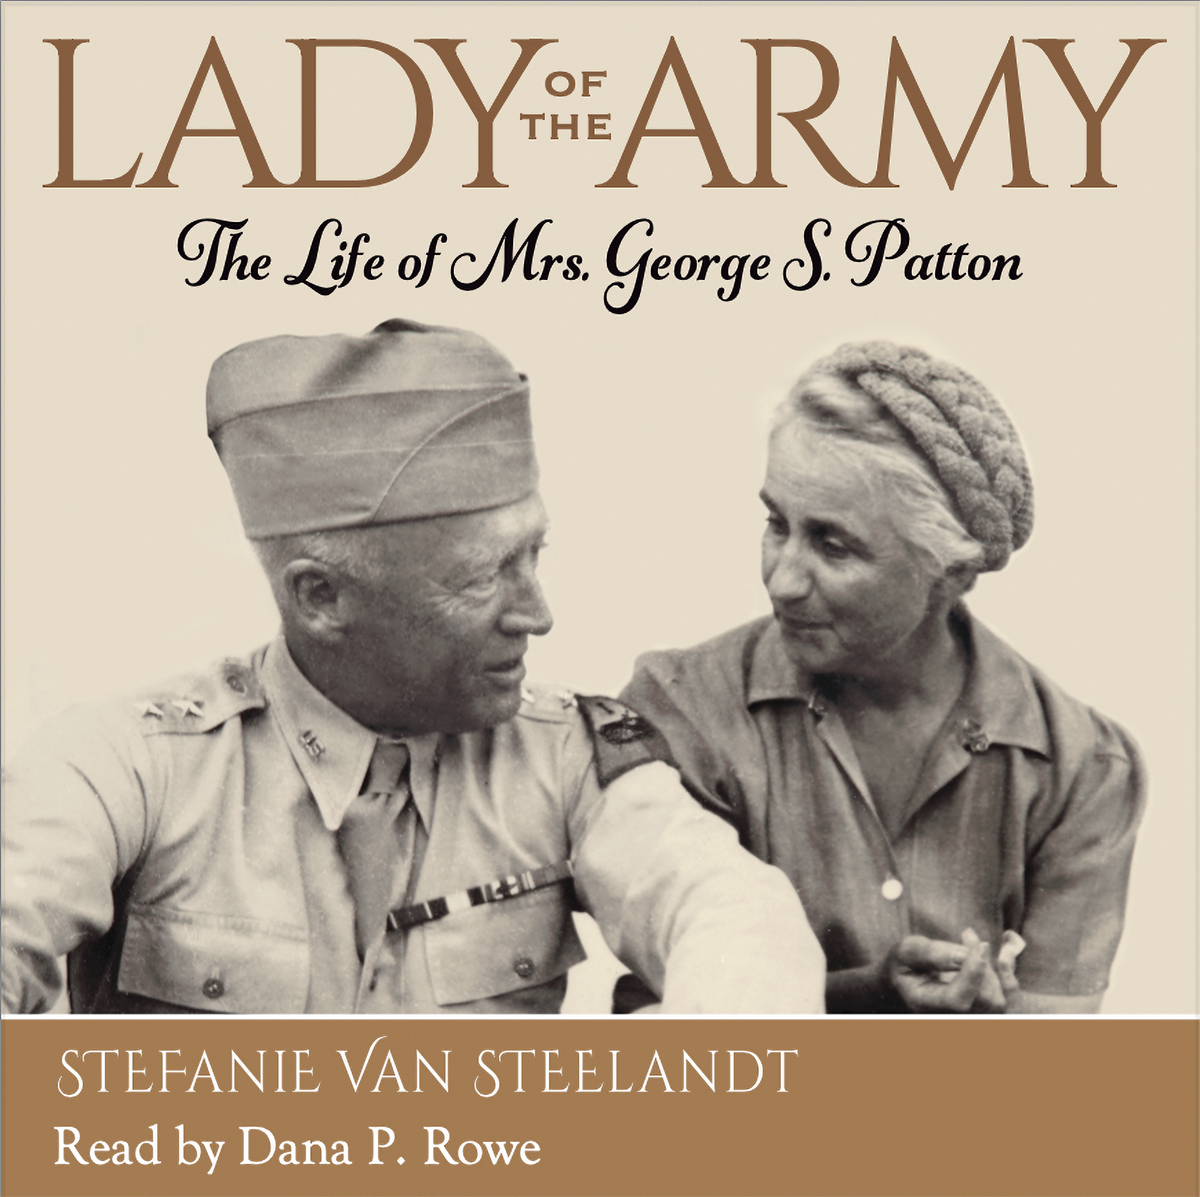 Lady-of-the-Army-Audible-Cover-1200